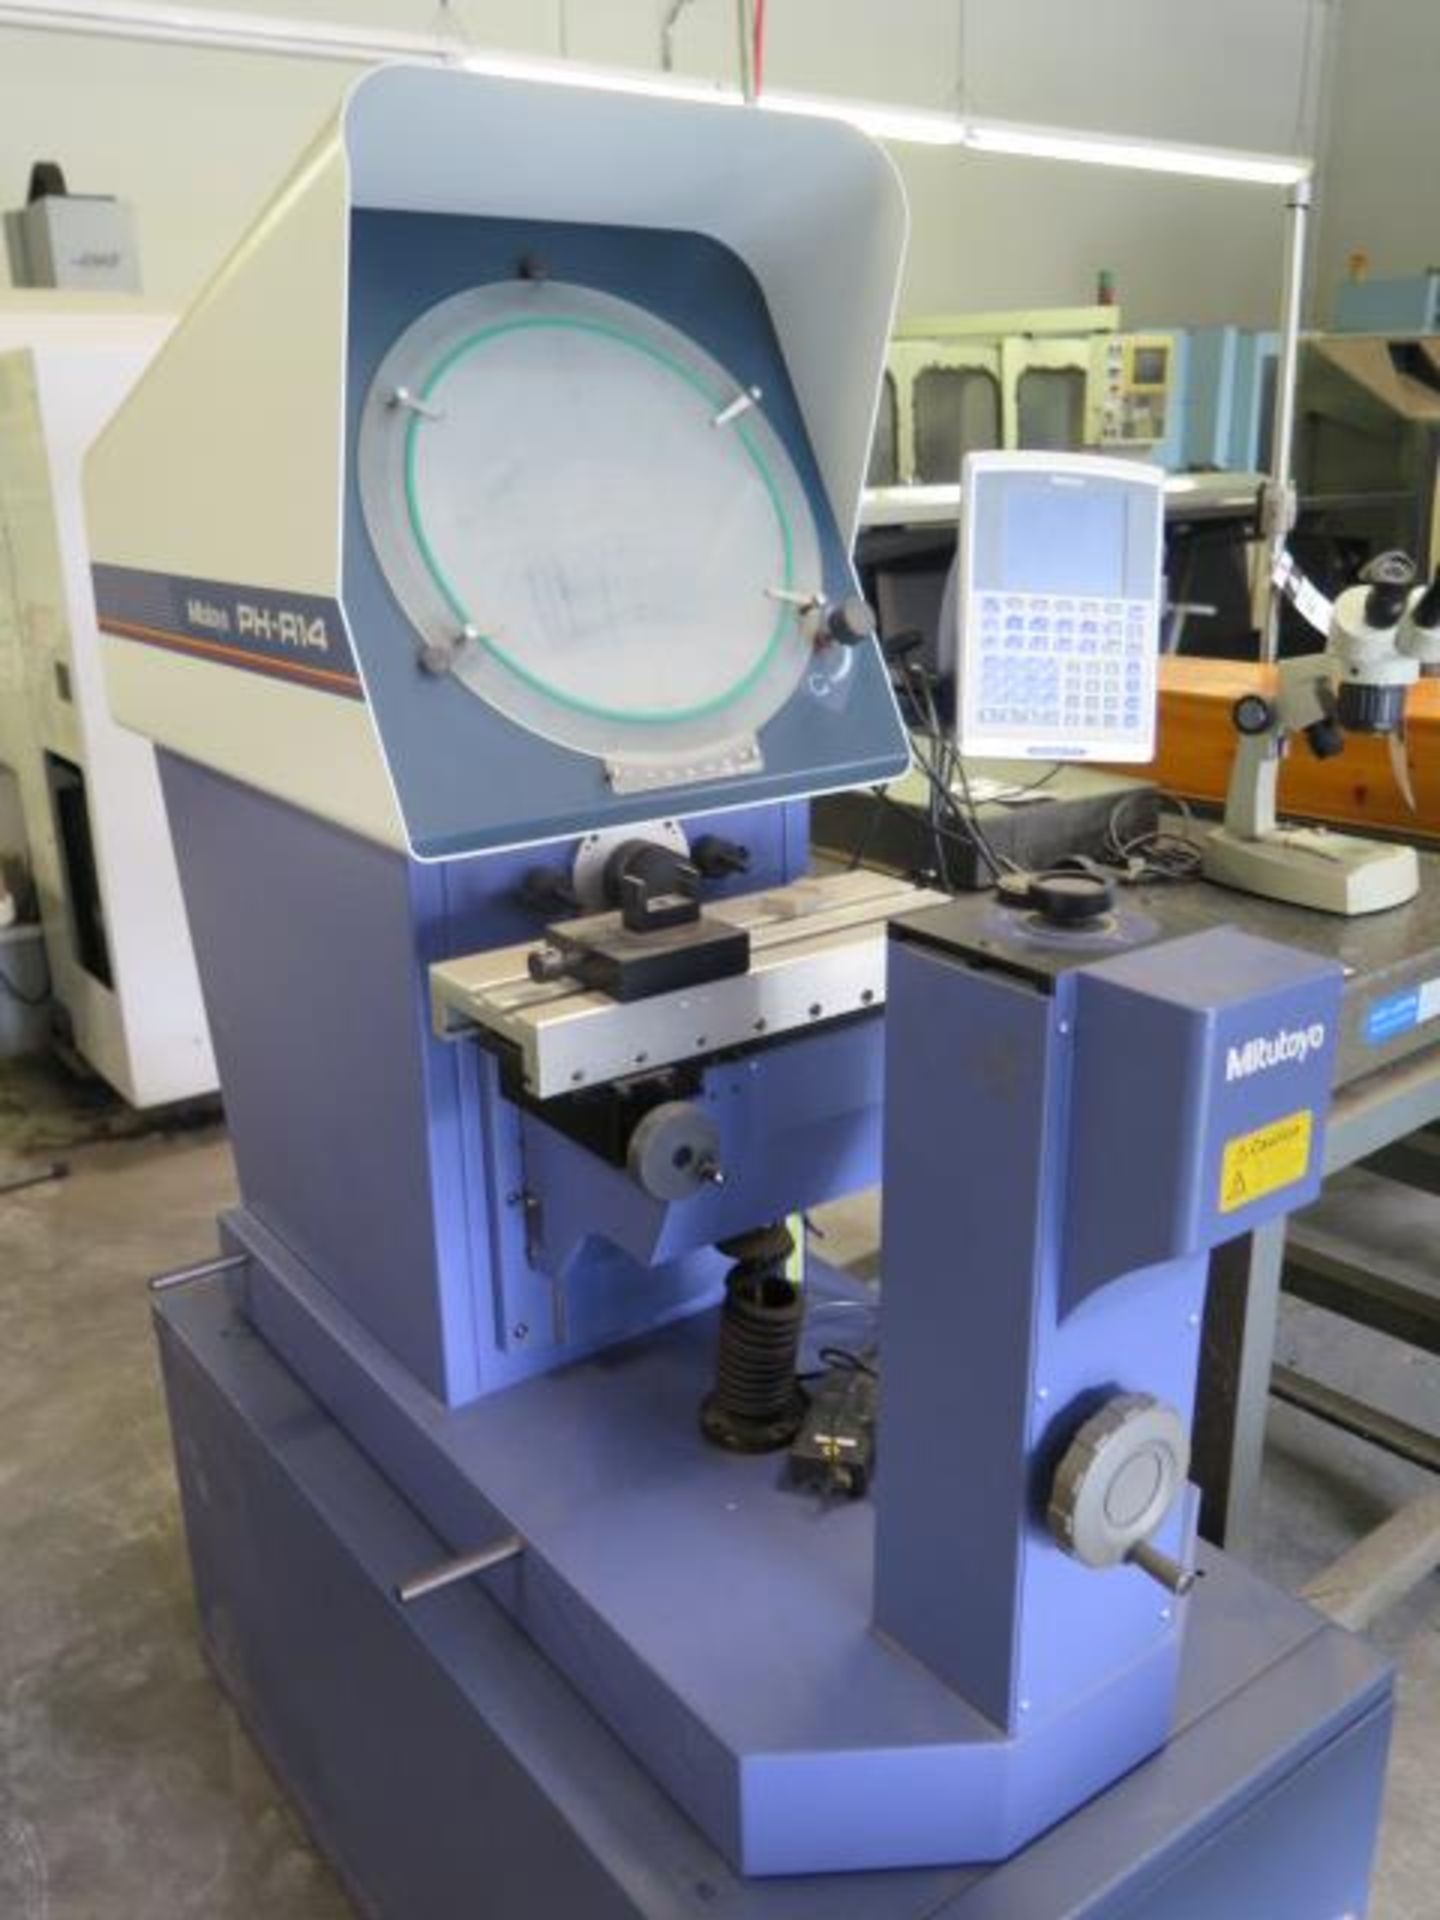 Mitutoyo PH-A14 14” Optical Comparator s/n 507019 w/ QM-DATA200 Programmable DRO, SOLD AS IS - Image 2 of 15